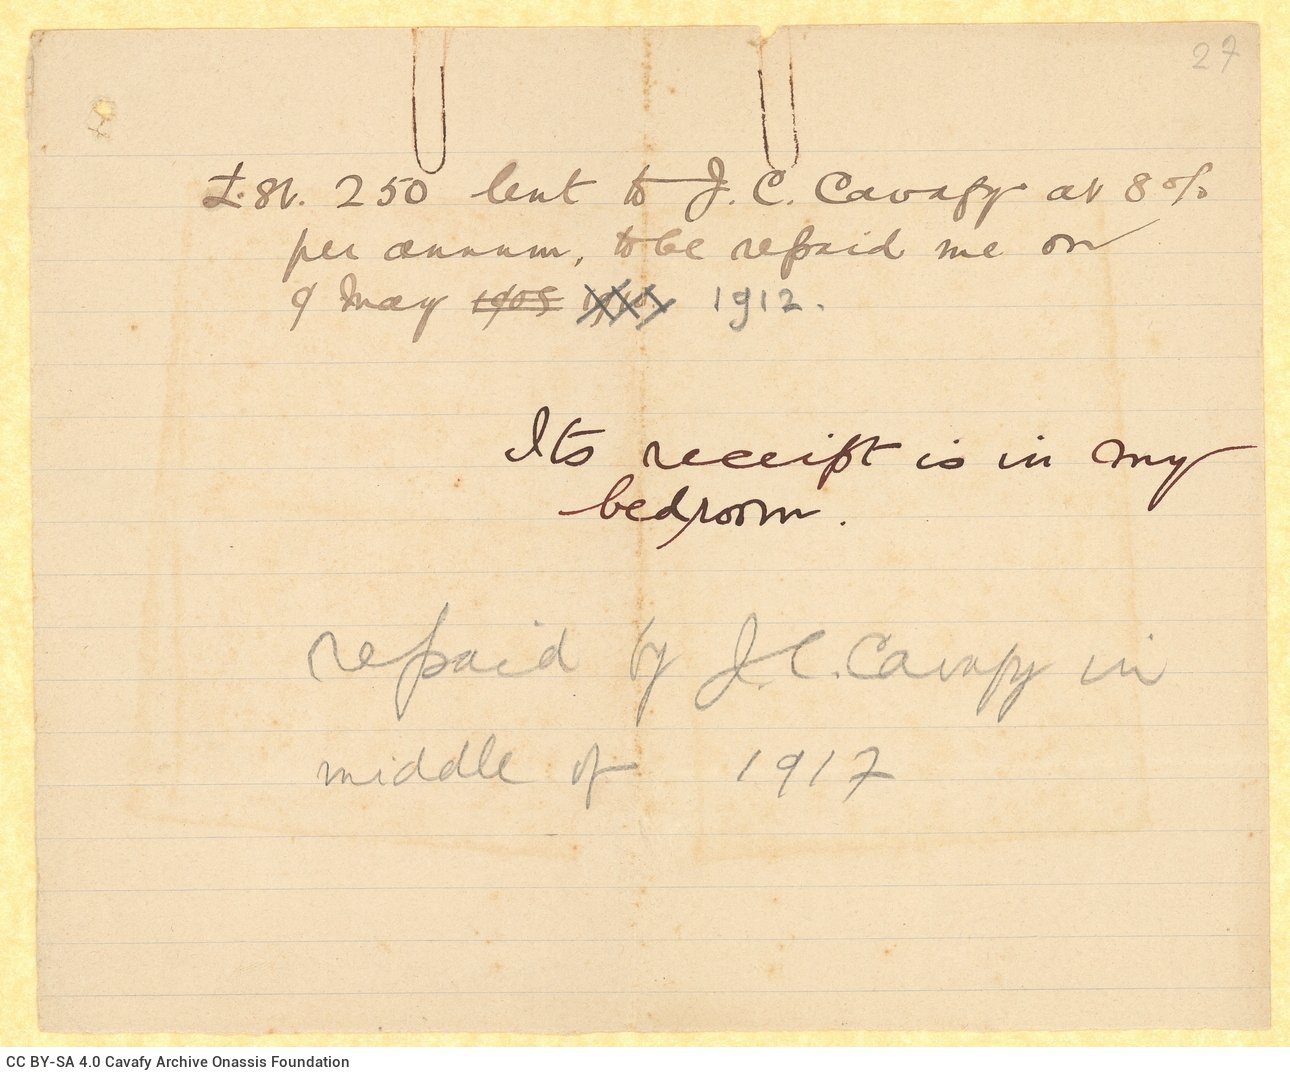 Handwritten note regarding the lending money to J. Cavafy (it is obviously the poet's brother, John), repaid in 1912 and 1